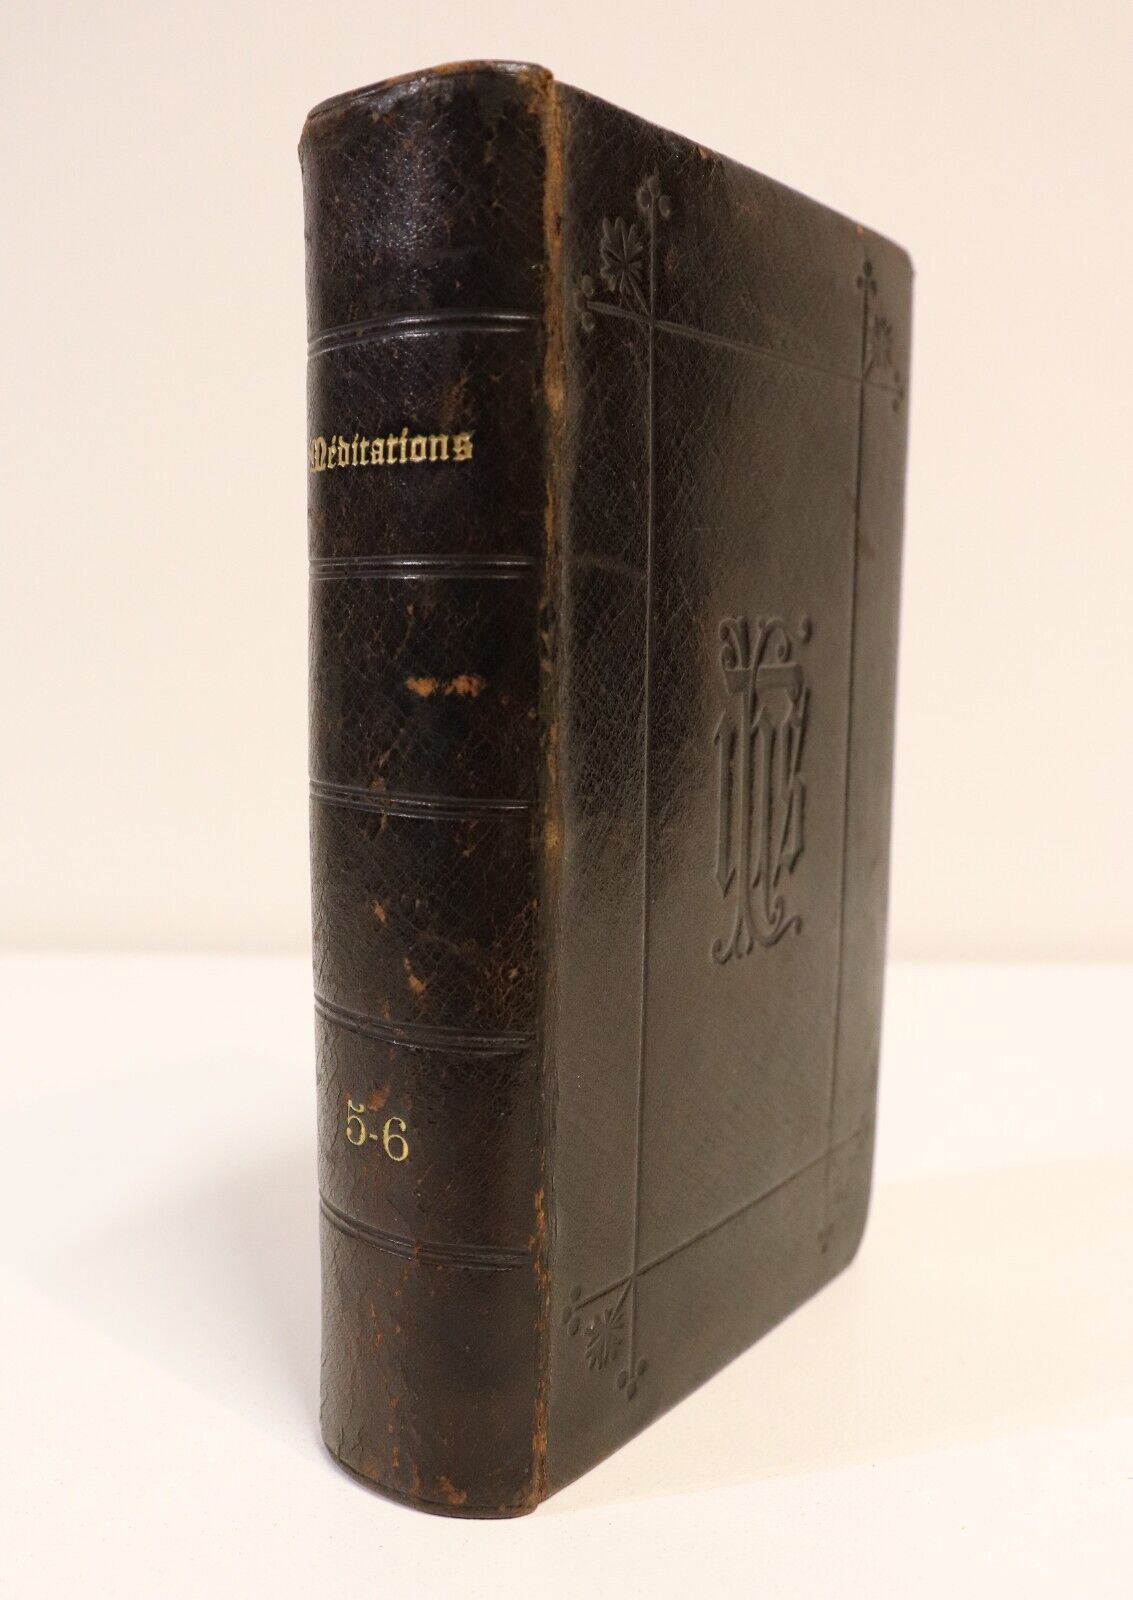 Jesus Christ Meditations & Contemplations - 1891 - French Religious Book